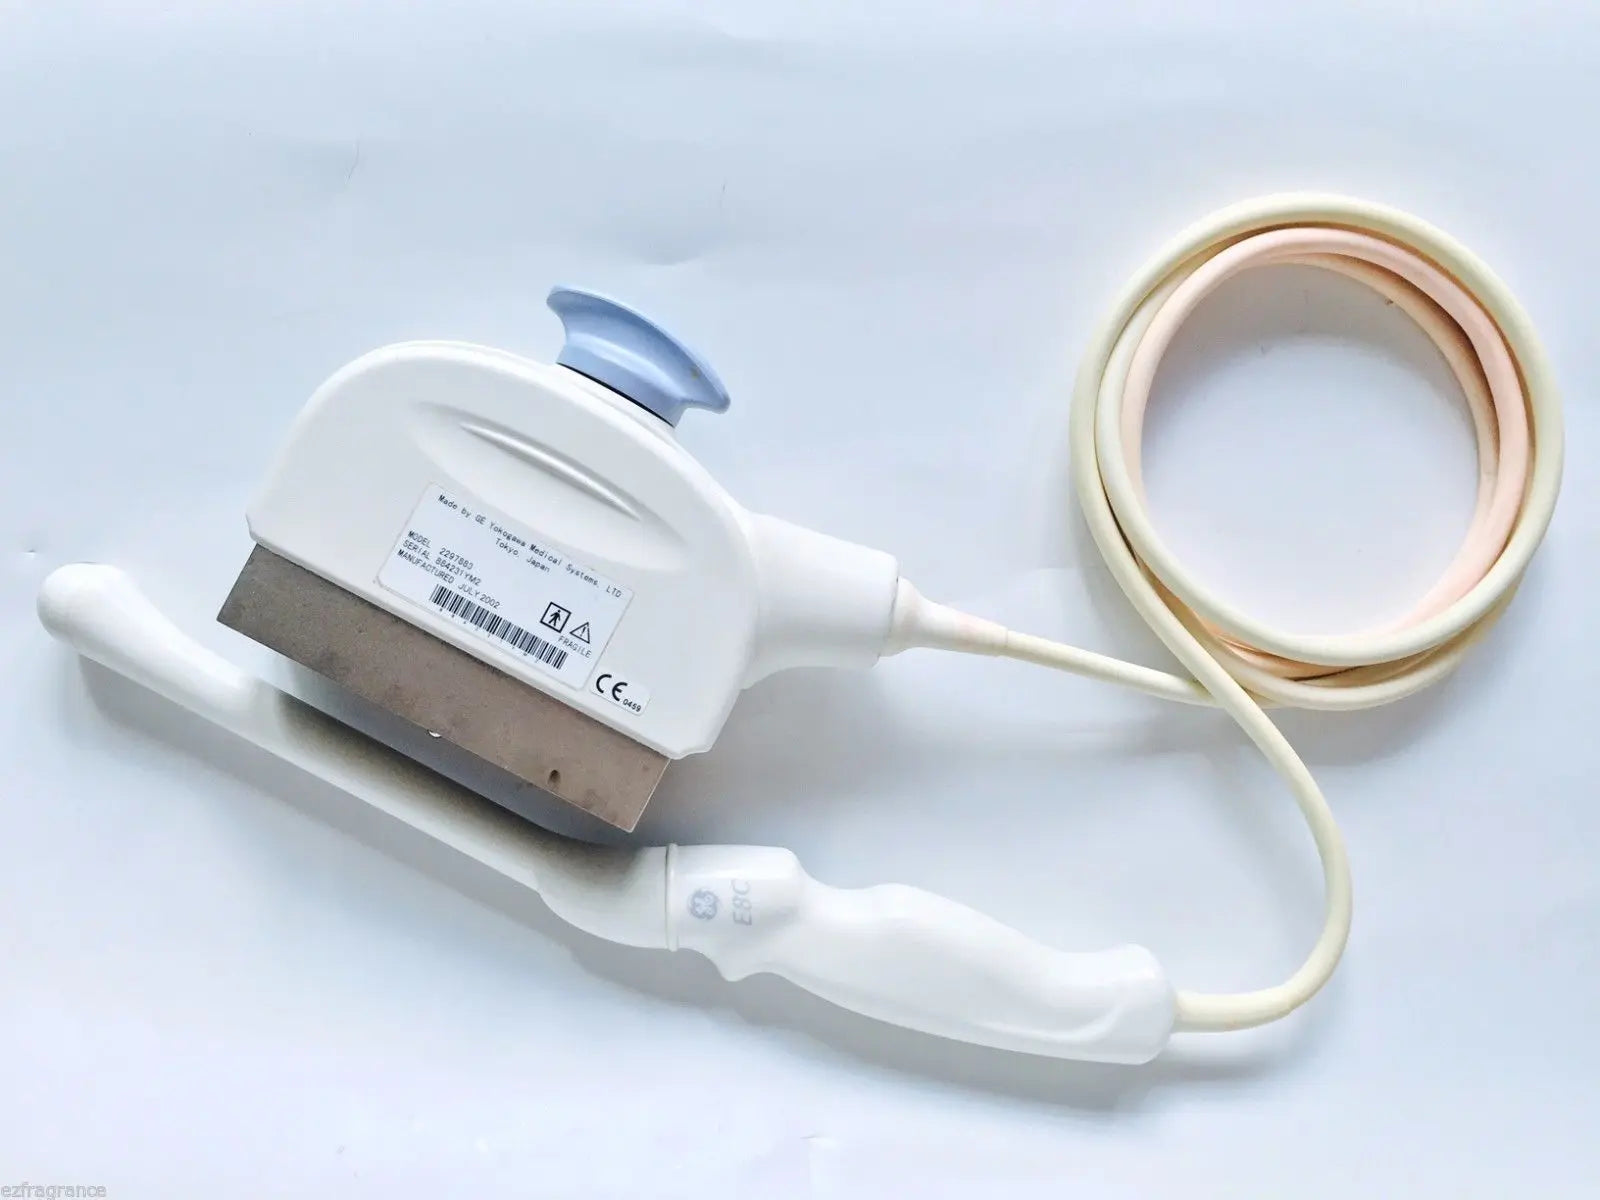 GE E8C transvaginal ultrasound transducer for GE Logiq and Vivid series.USED DIAGNOSTIC ULTRASOUND MACHINES FOR SALE